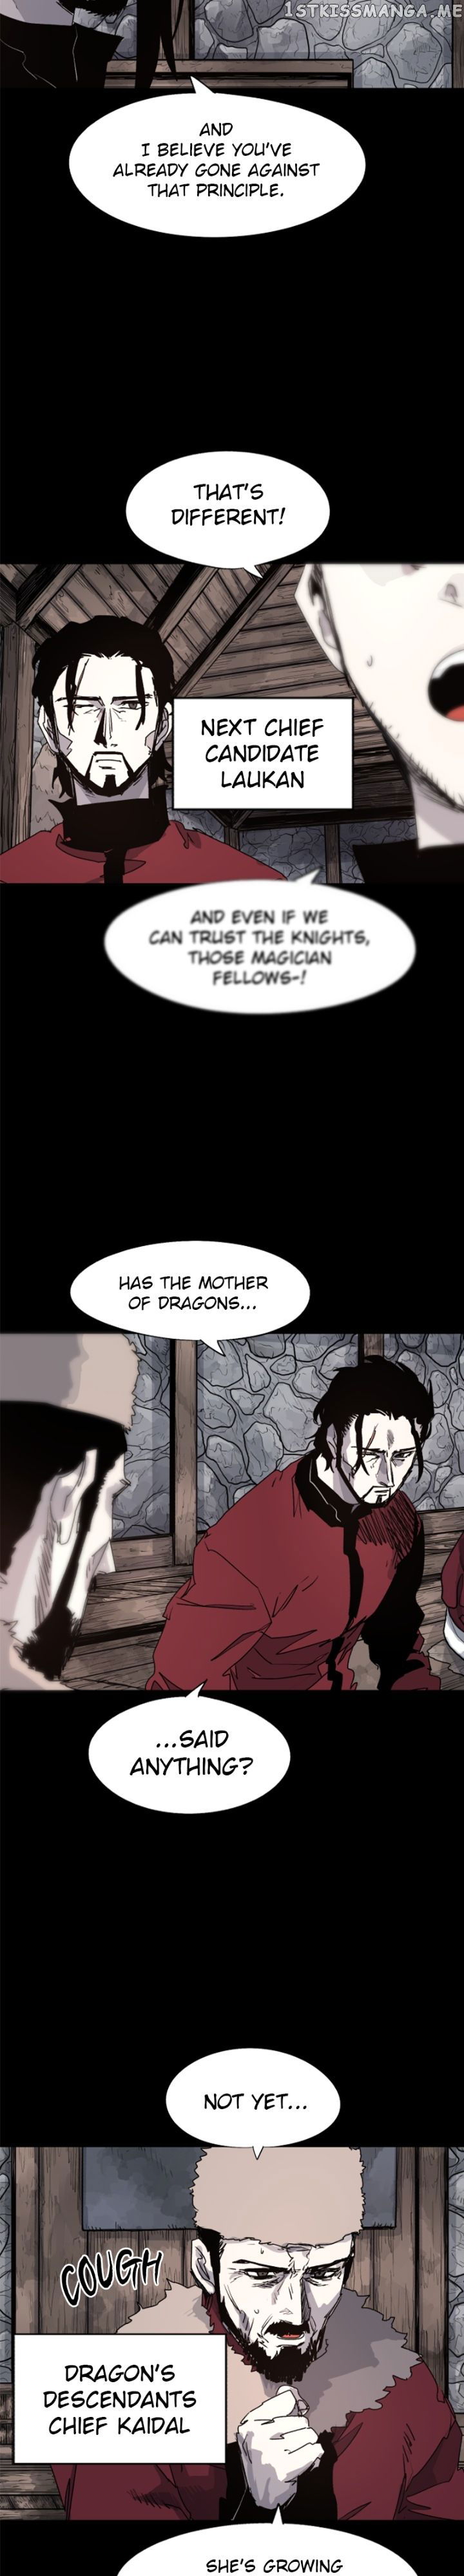 The Knight of Embers Chapter 105 page 11